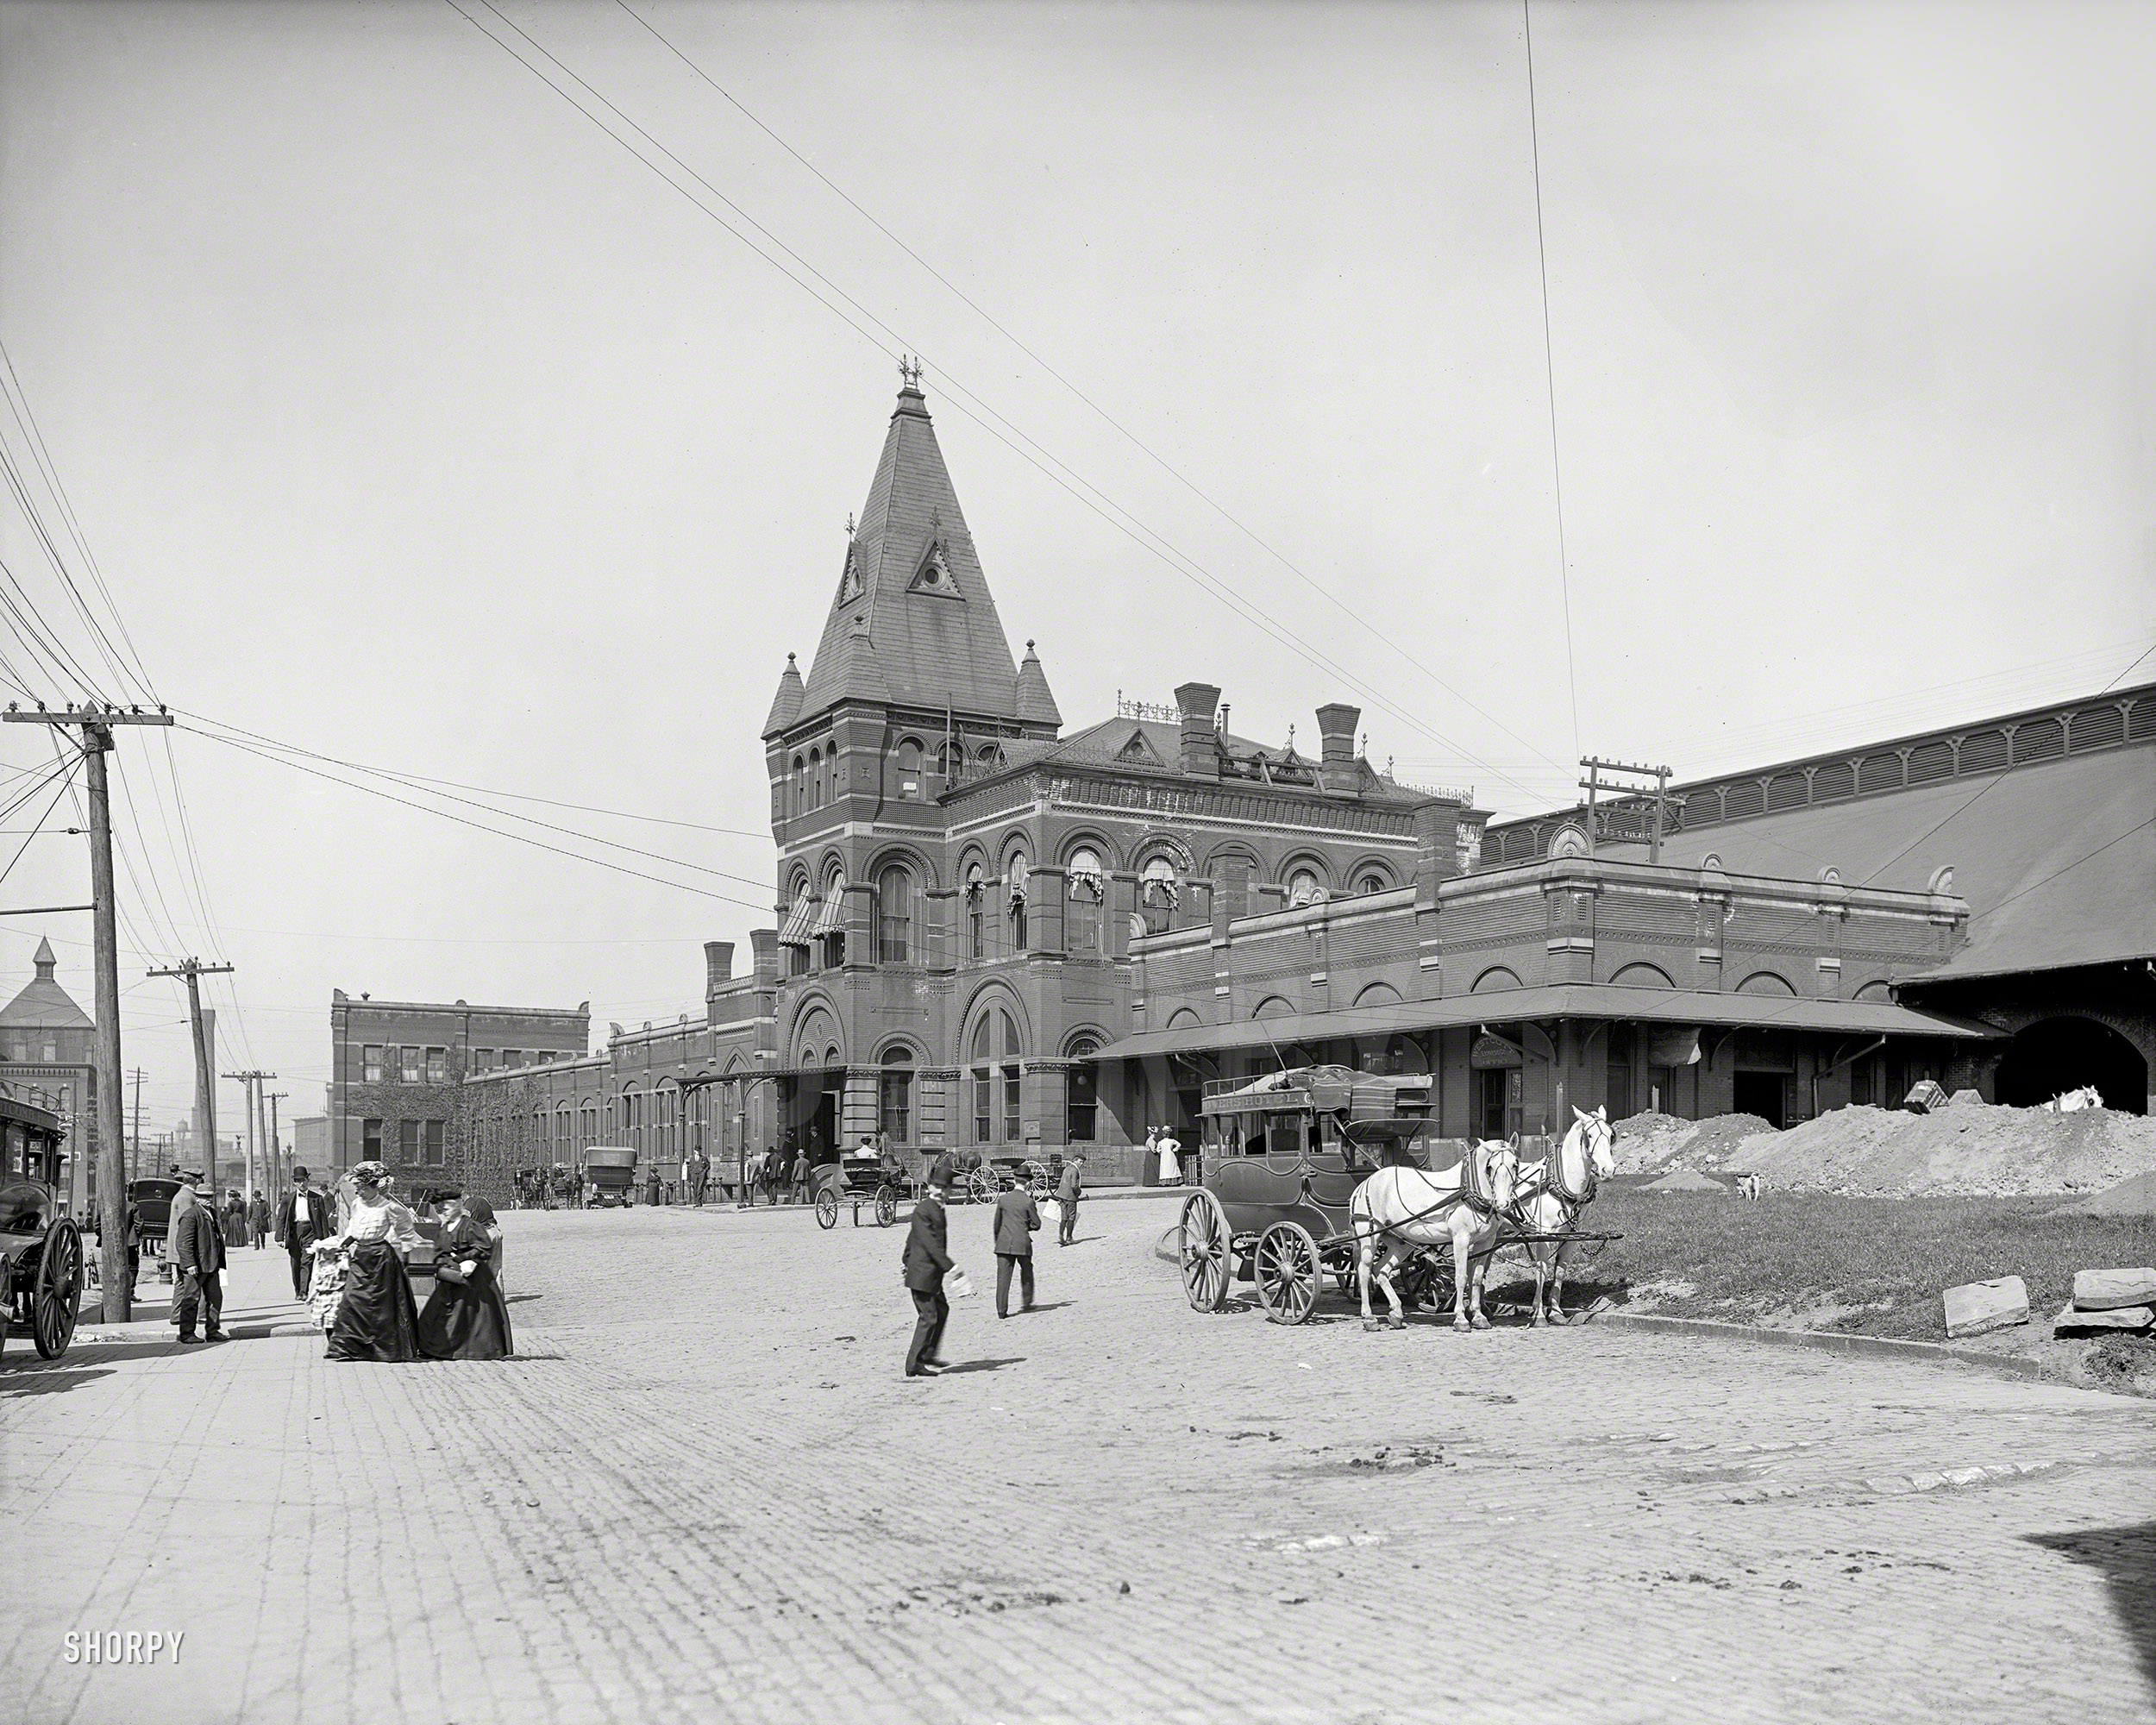 Circa 1905. "New York Central railroad station, Rochester." 8x10 inch dry plate glass negative, Detroit Publishing Company. View full size.